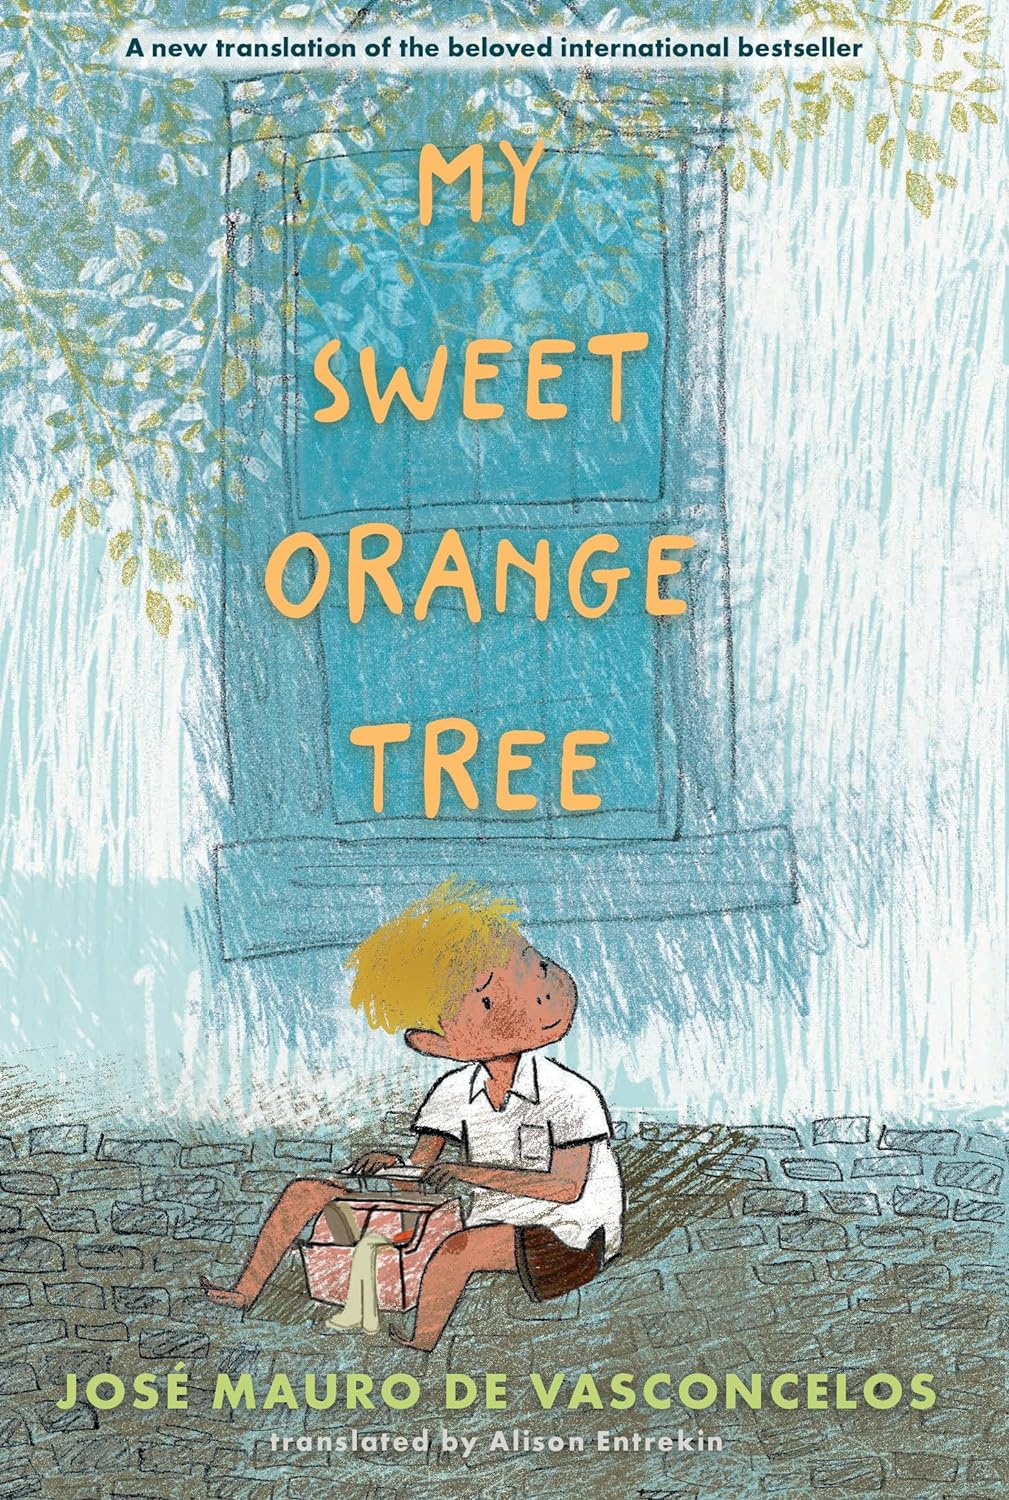 Cover for My Sweet Orange Tree featuring an illustration of a young boy with blonde hair sitting on the ground made of brick or cobble beside a window of a building with a toolbox at his feet looking off to the side. The window is blue and the leaves of a tree cover a corner of it.